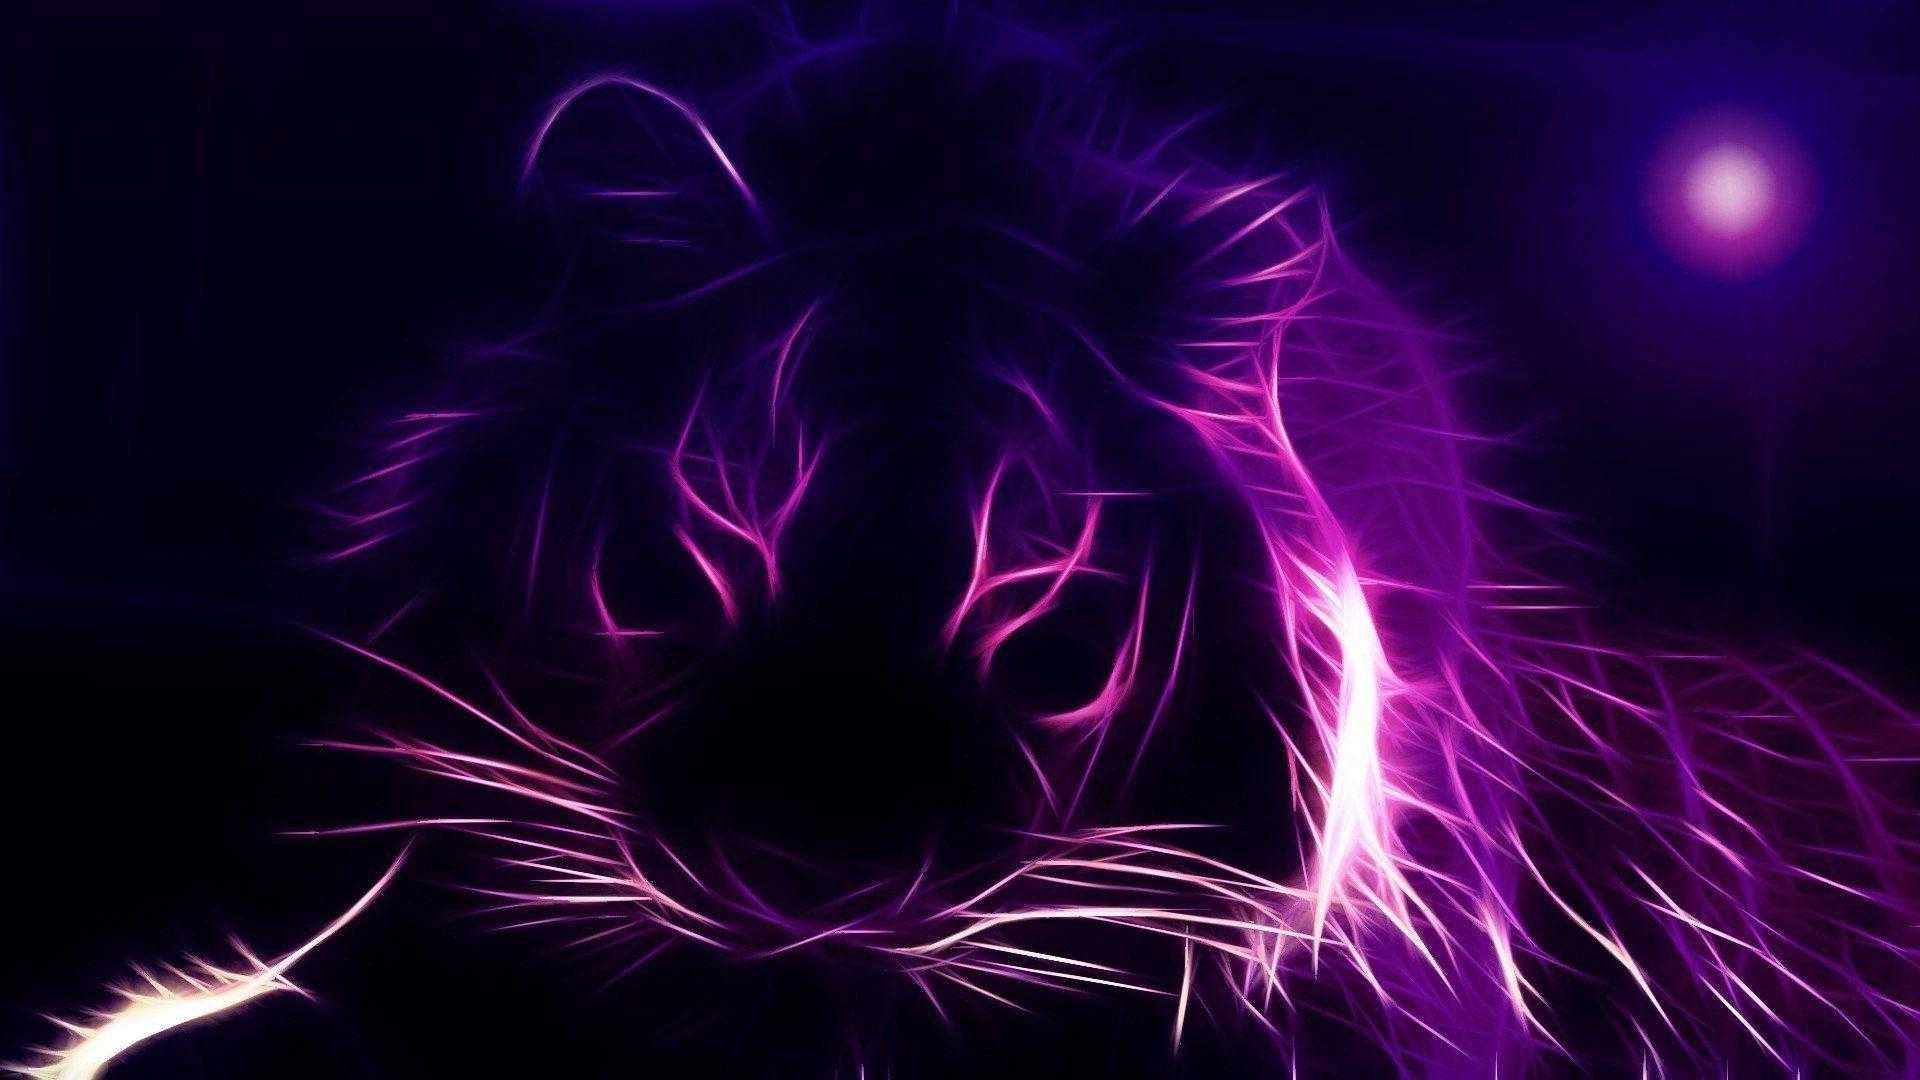 Black And Purple Aesthetic 1920x1080 Wallpapers - Wallpaper Cave